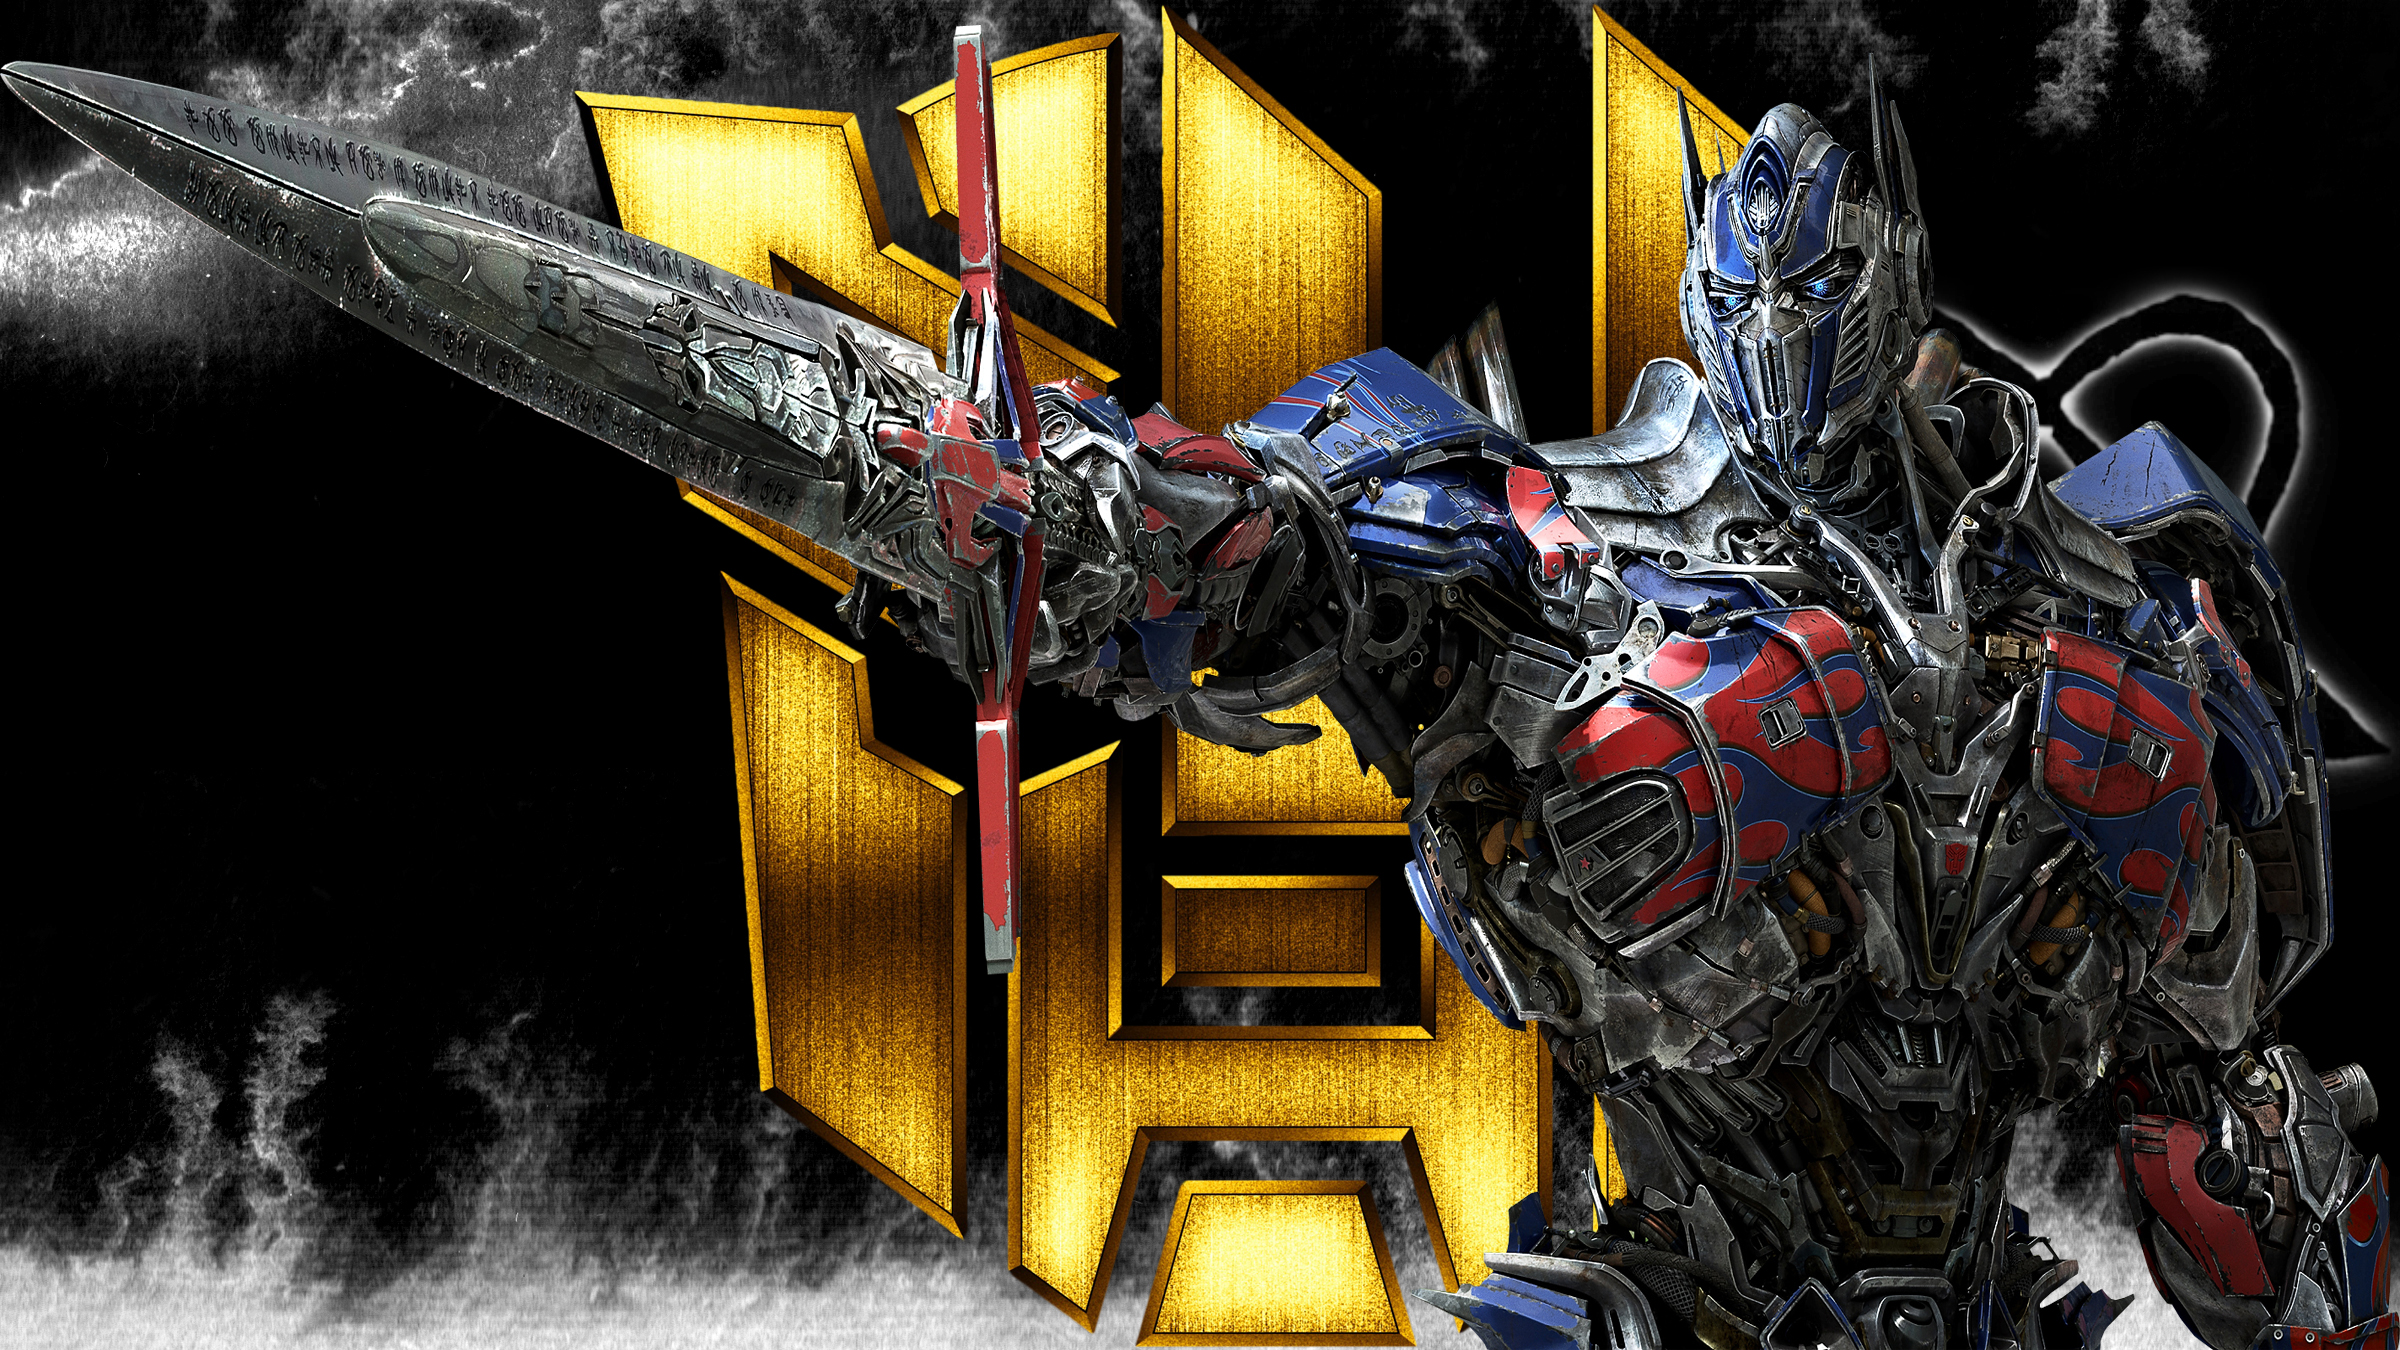 Tf Age Of Extinction Optimus Prime Wallpaper By Rajivcr7 On